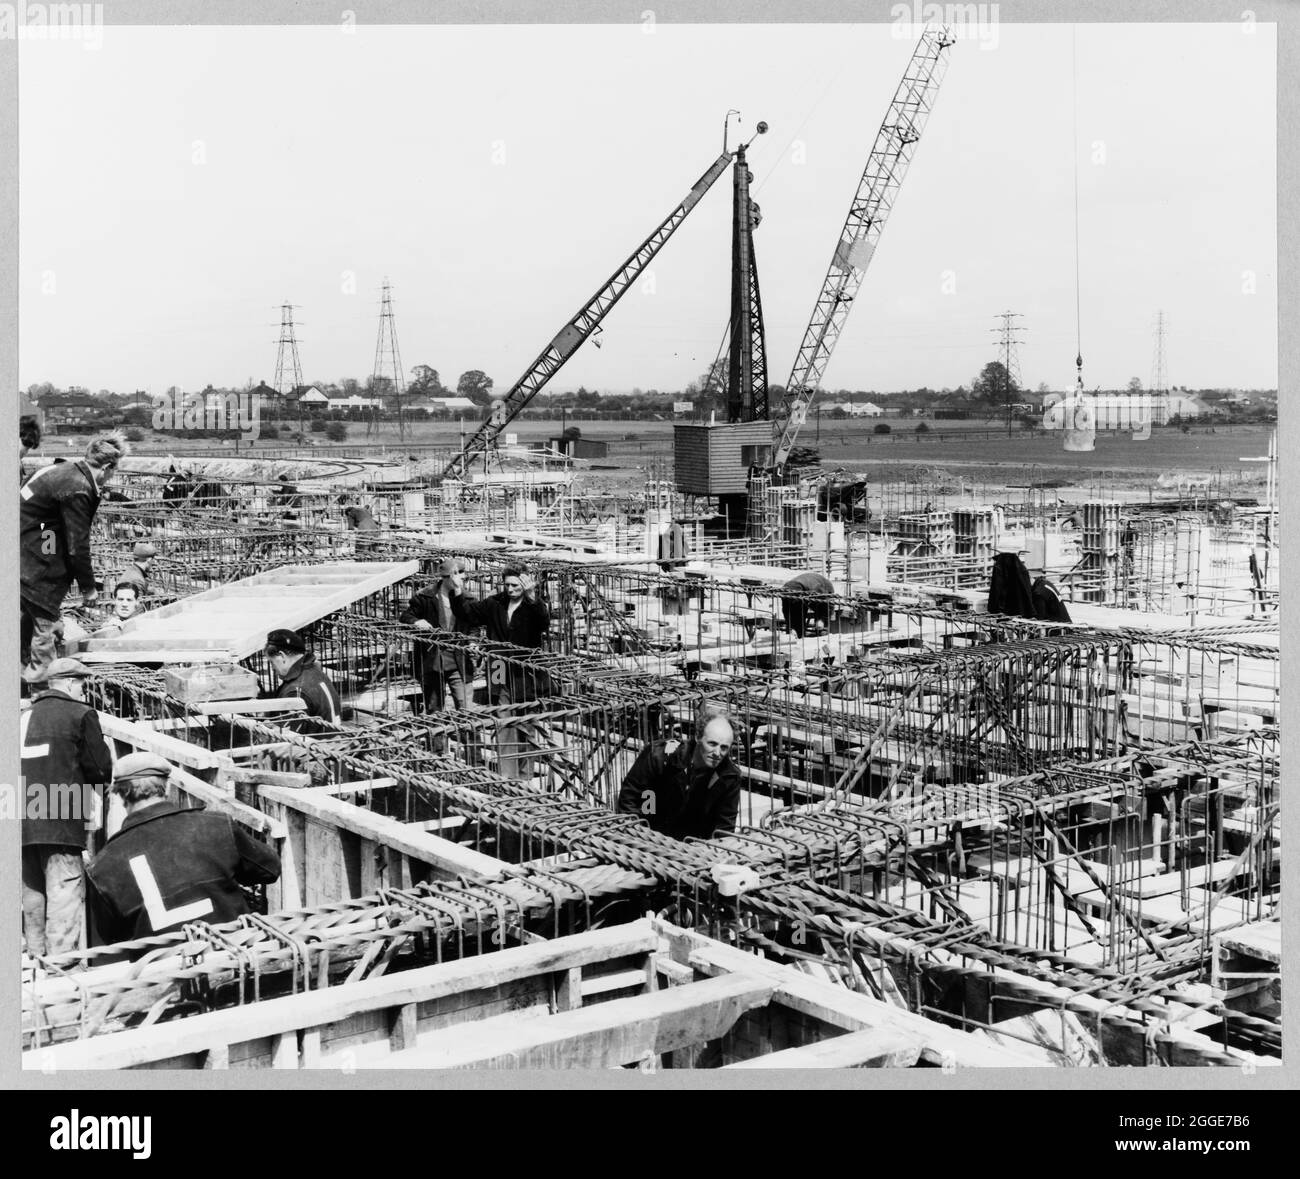 A view of the new foundry under construction at the Ford Motor Company Works, showing a team of men working on a typical section of steel reinforcement being fixed for the columns and beams of the first floor. This image was catalogued as part of the Breaking New Ground Project in partnership with the John Laing Charitable Trust in 2019-20. Stock Photo